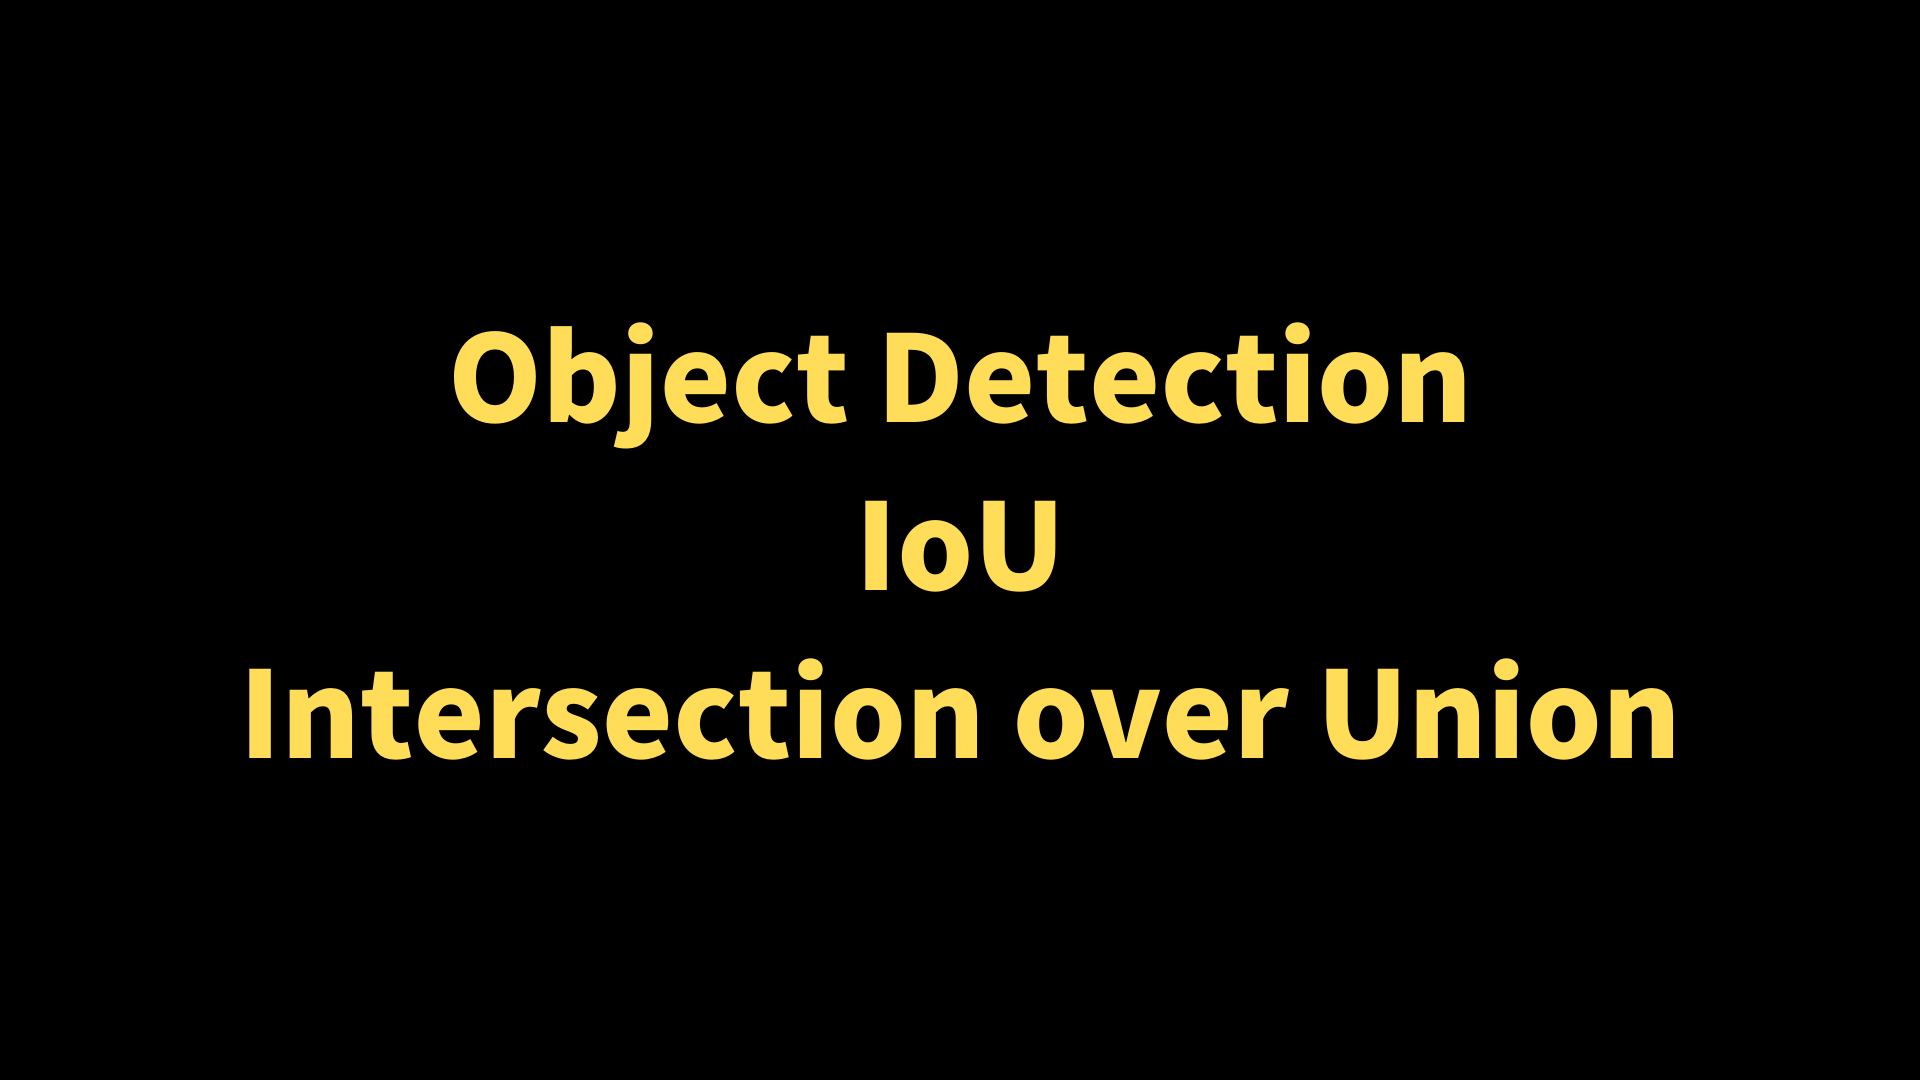 Object Detection: Intersection over Union (IoU)